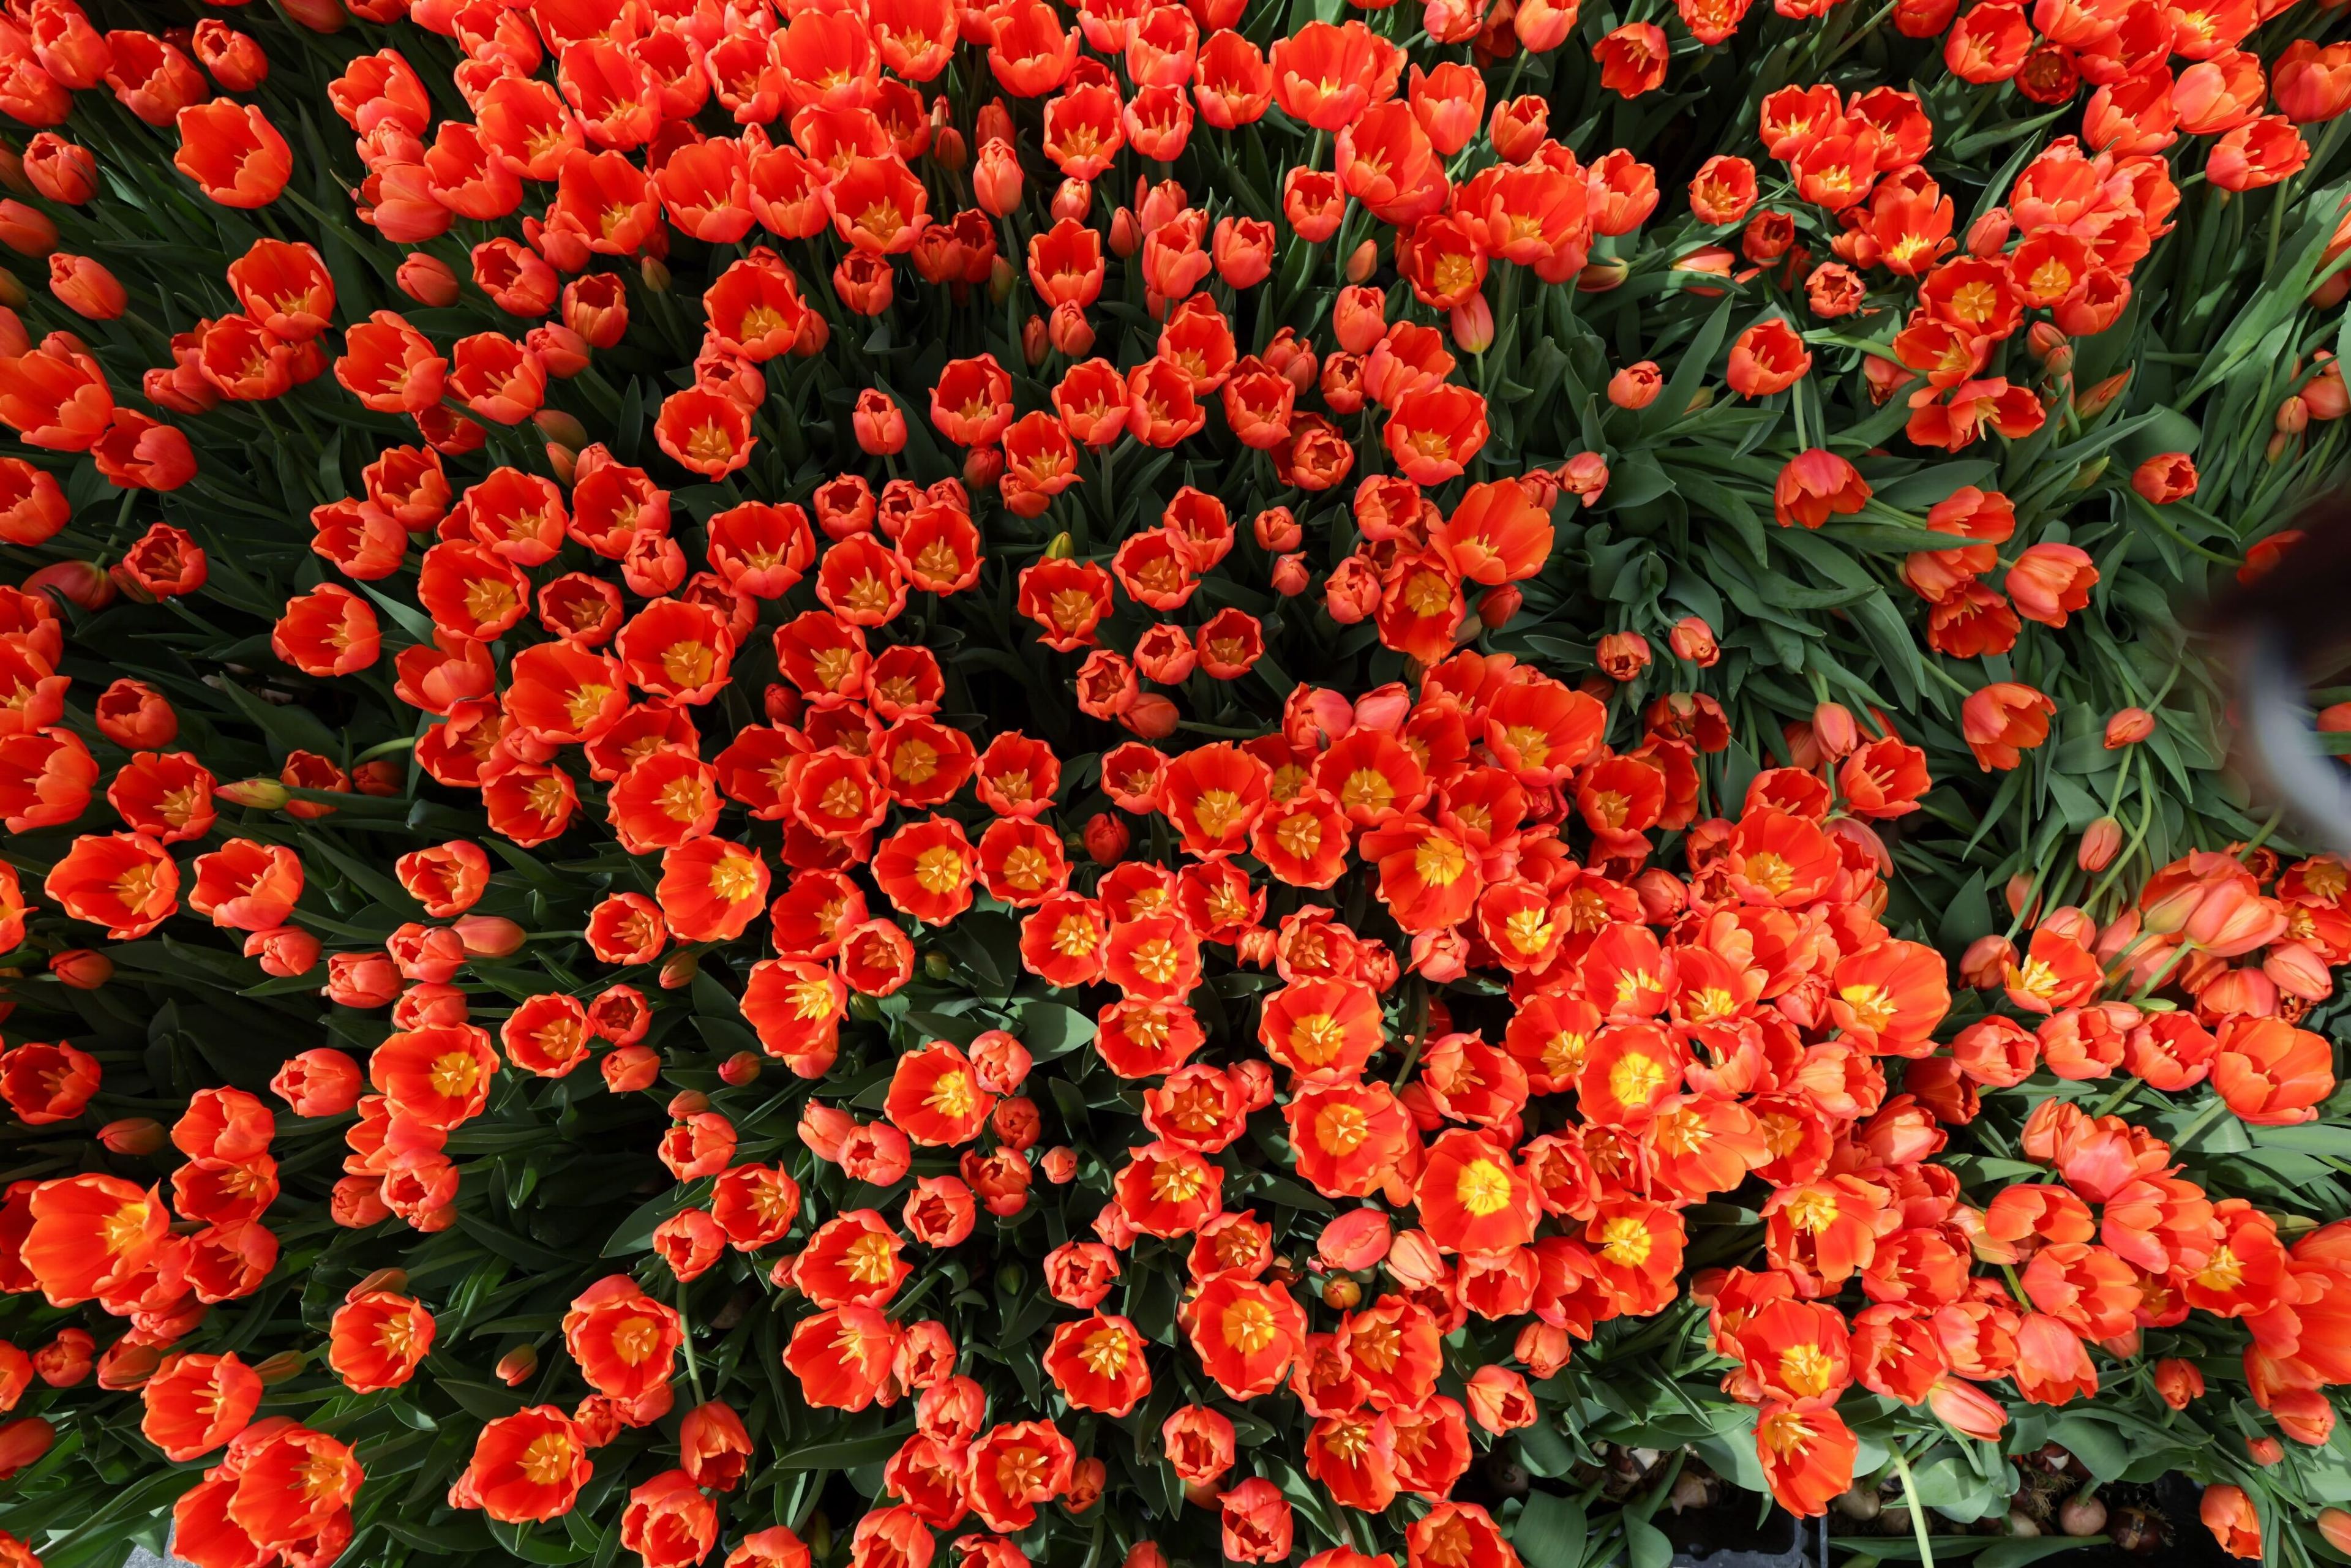 A dense array of vibrant orange-red tulips with yellow-edged petals, nestled in green foliage.